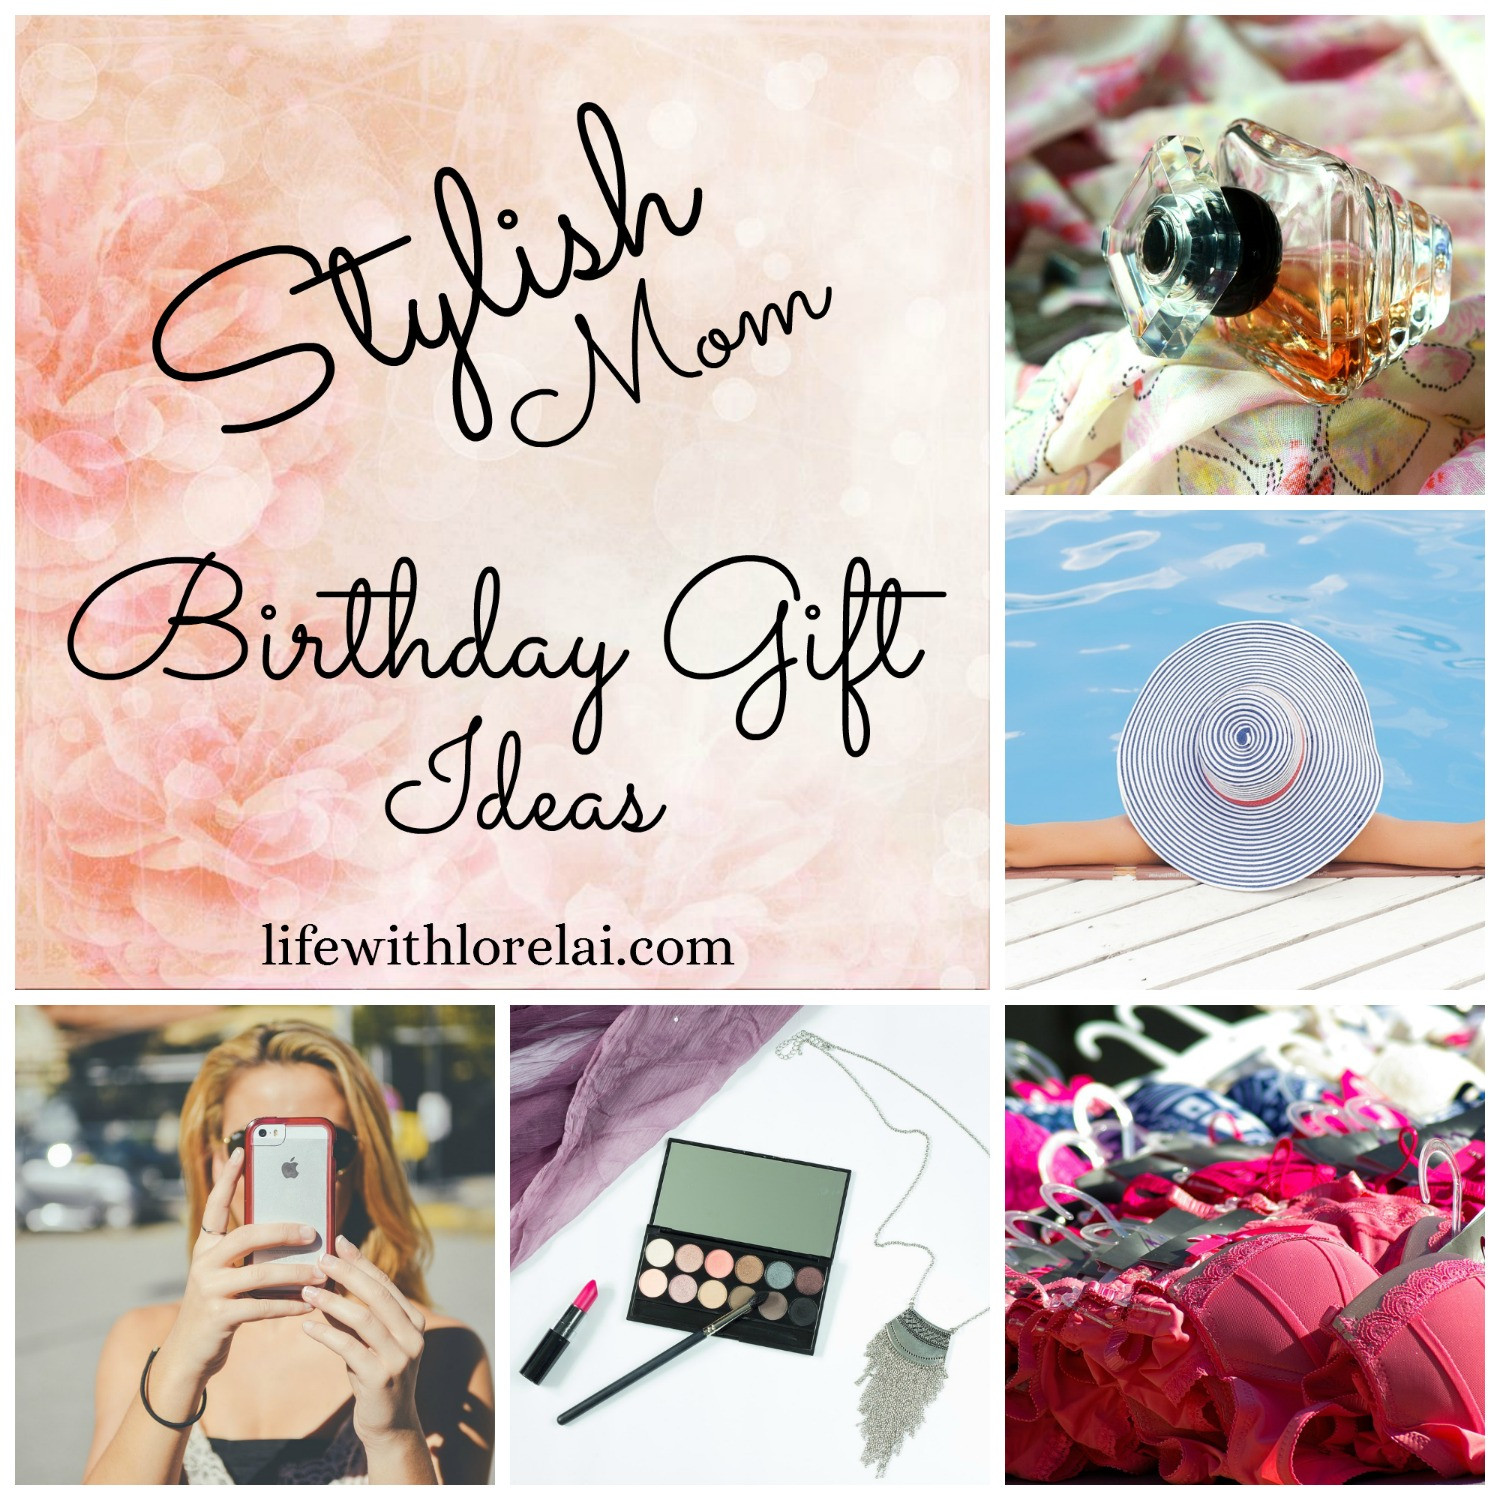 Birthday Gift Ideas For Mothers
 Birthday Gift Ideas For The Stylish Mom Life With Lorelai